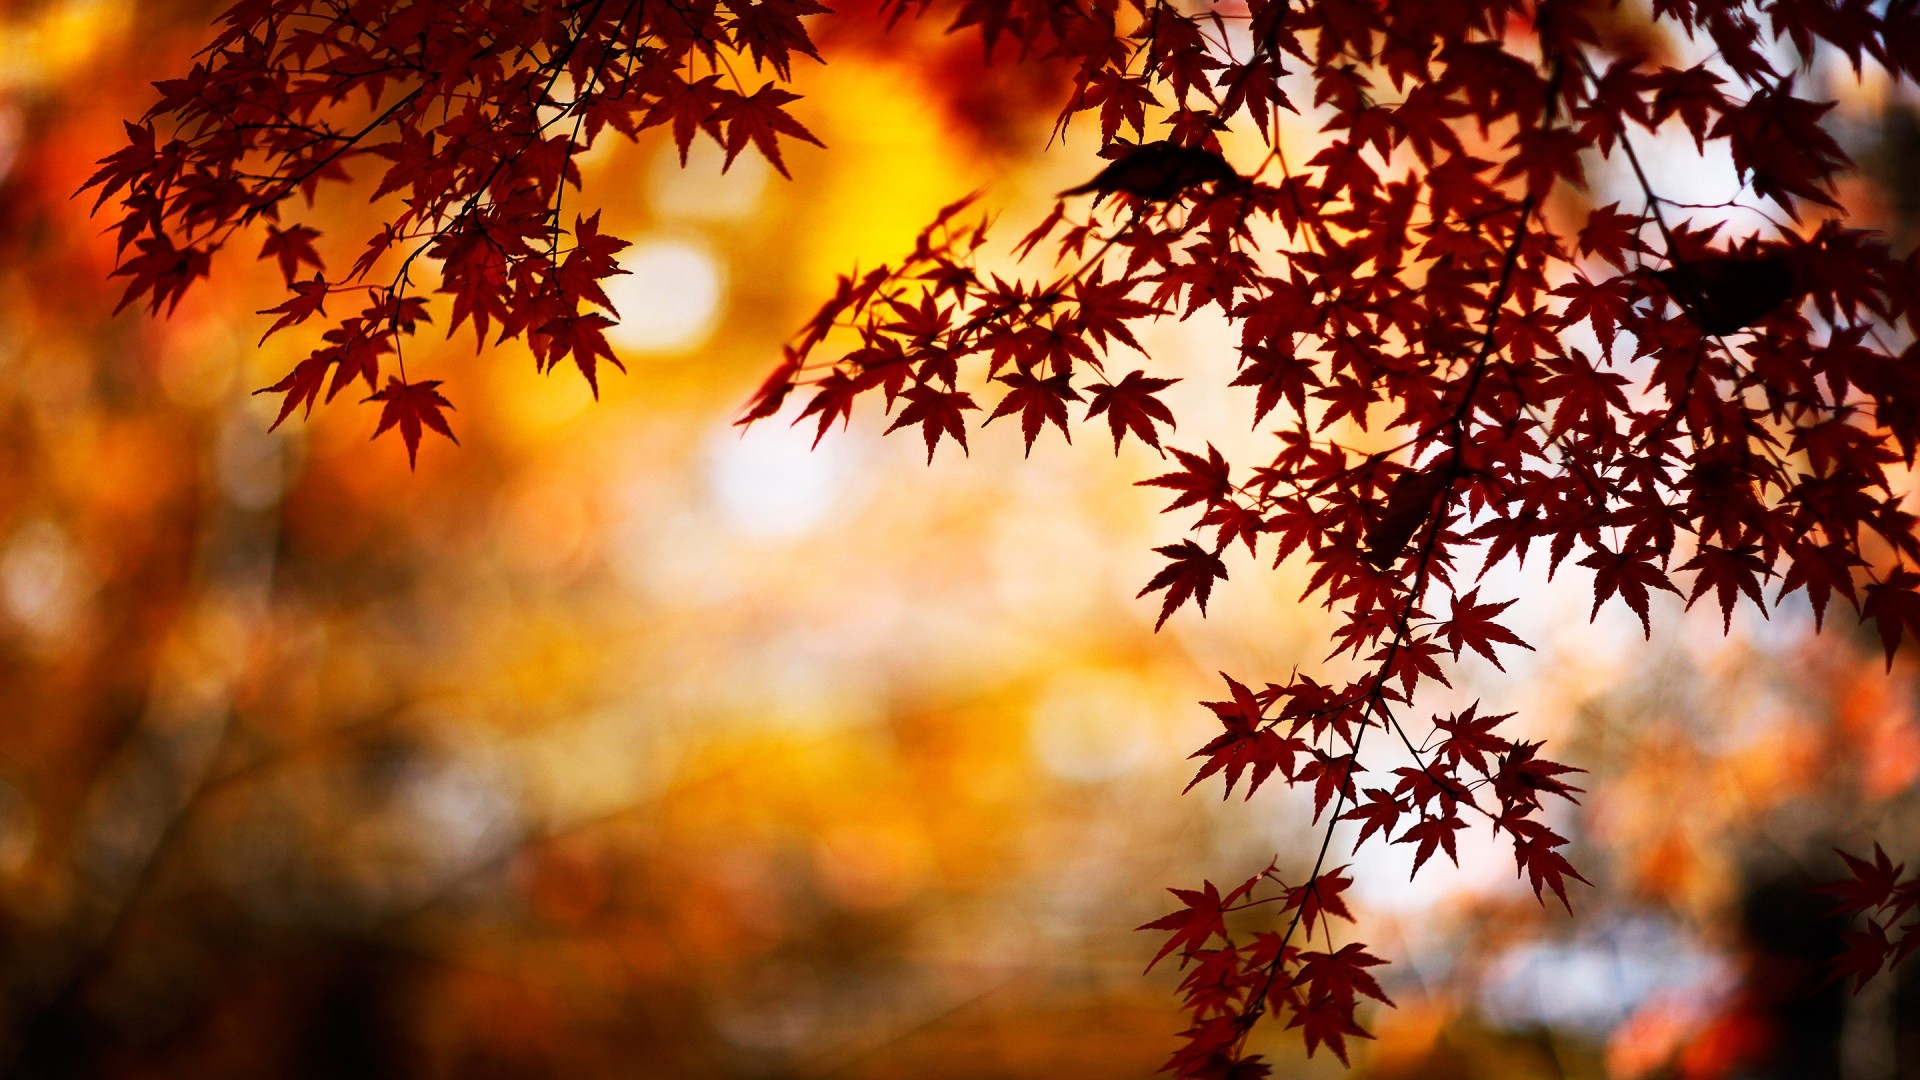 1920x1080 Wallpaper Fall nice hd wallpapers with red and orange colors